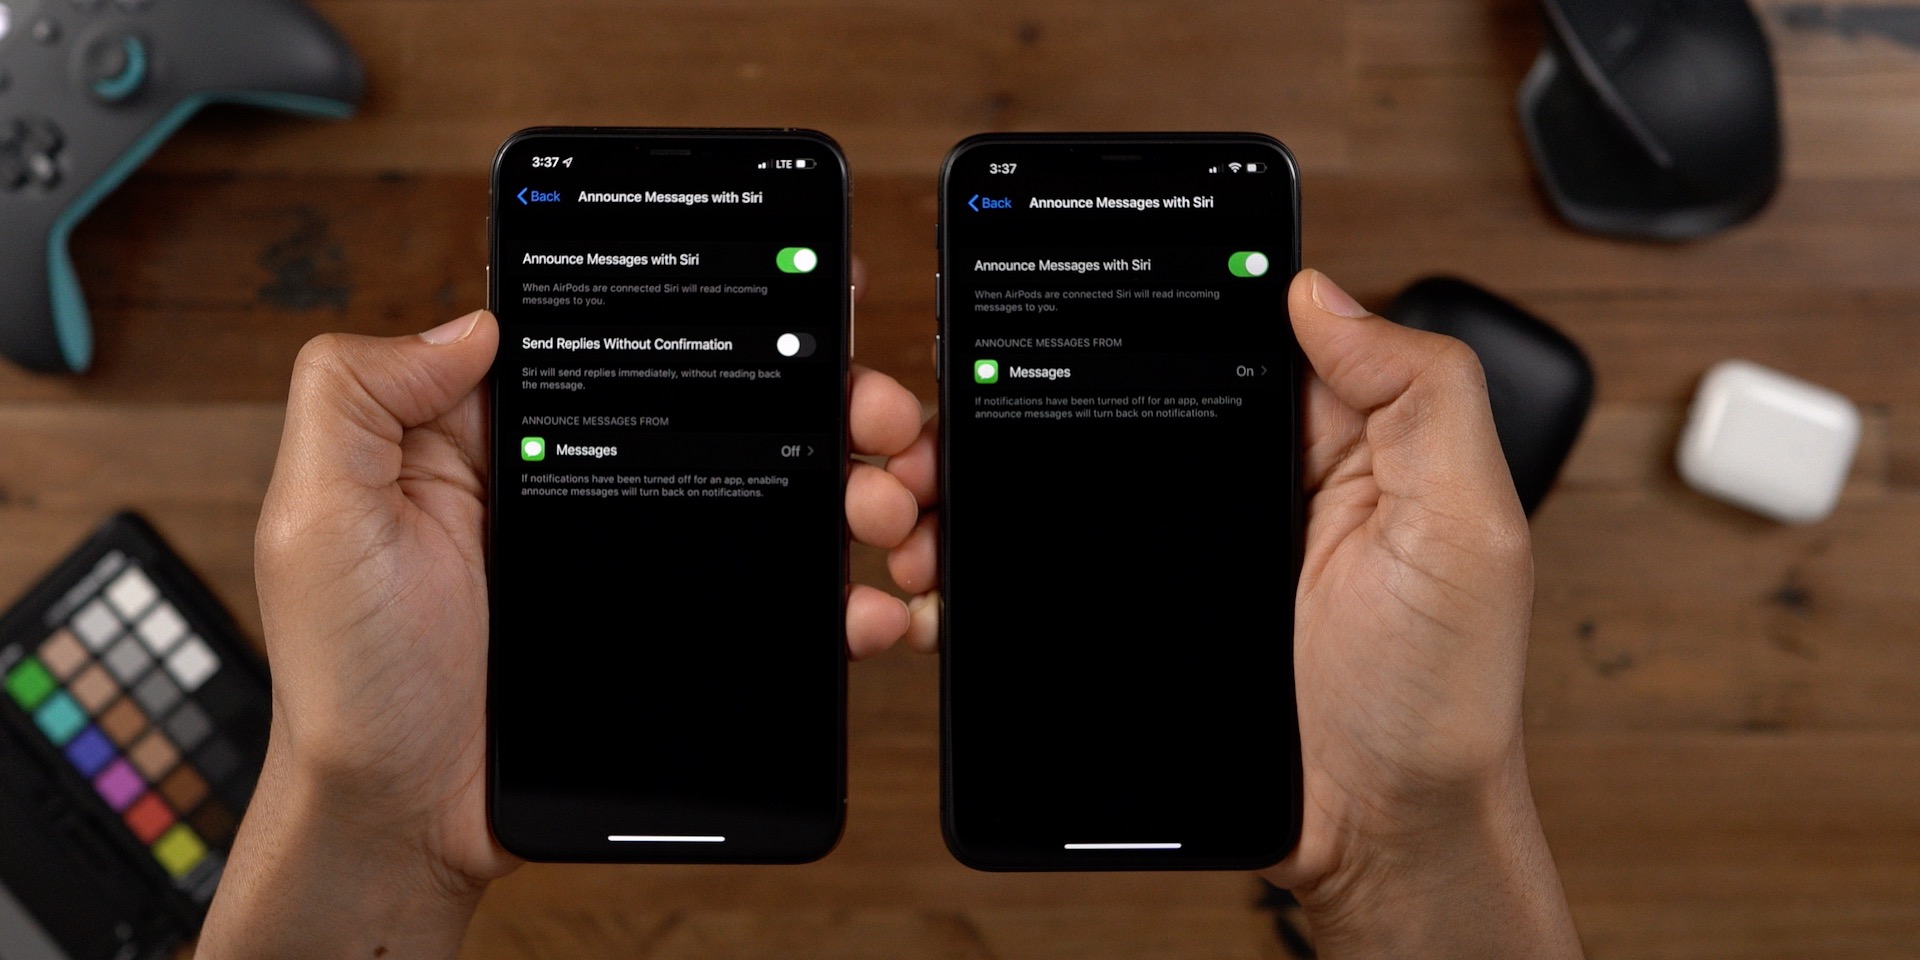 Announce Messages with Siri iOS 13 beta 2